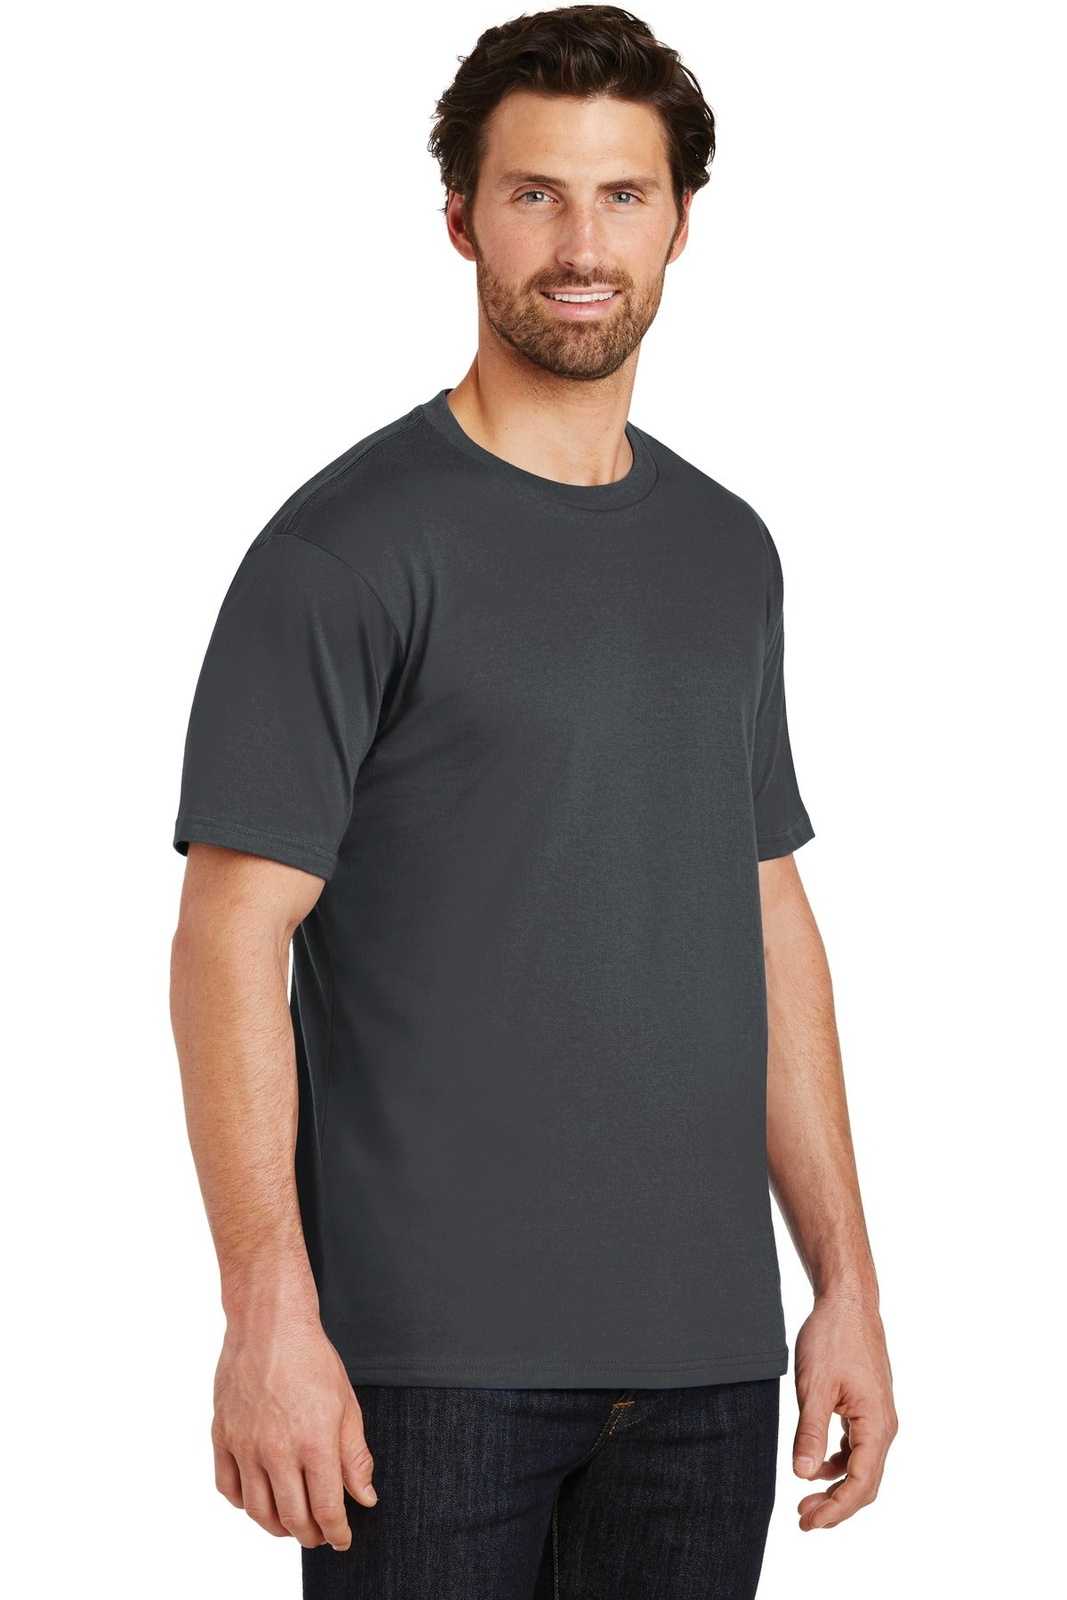 District DT104 Perfect Weight Tee - Charcoal - HIT a Double - 4